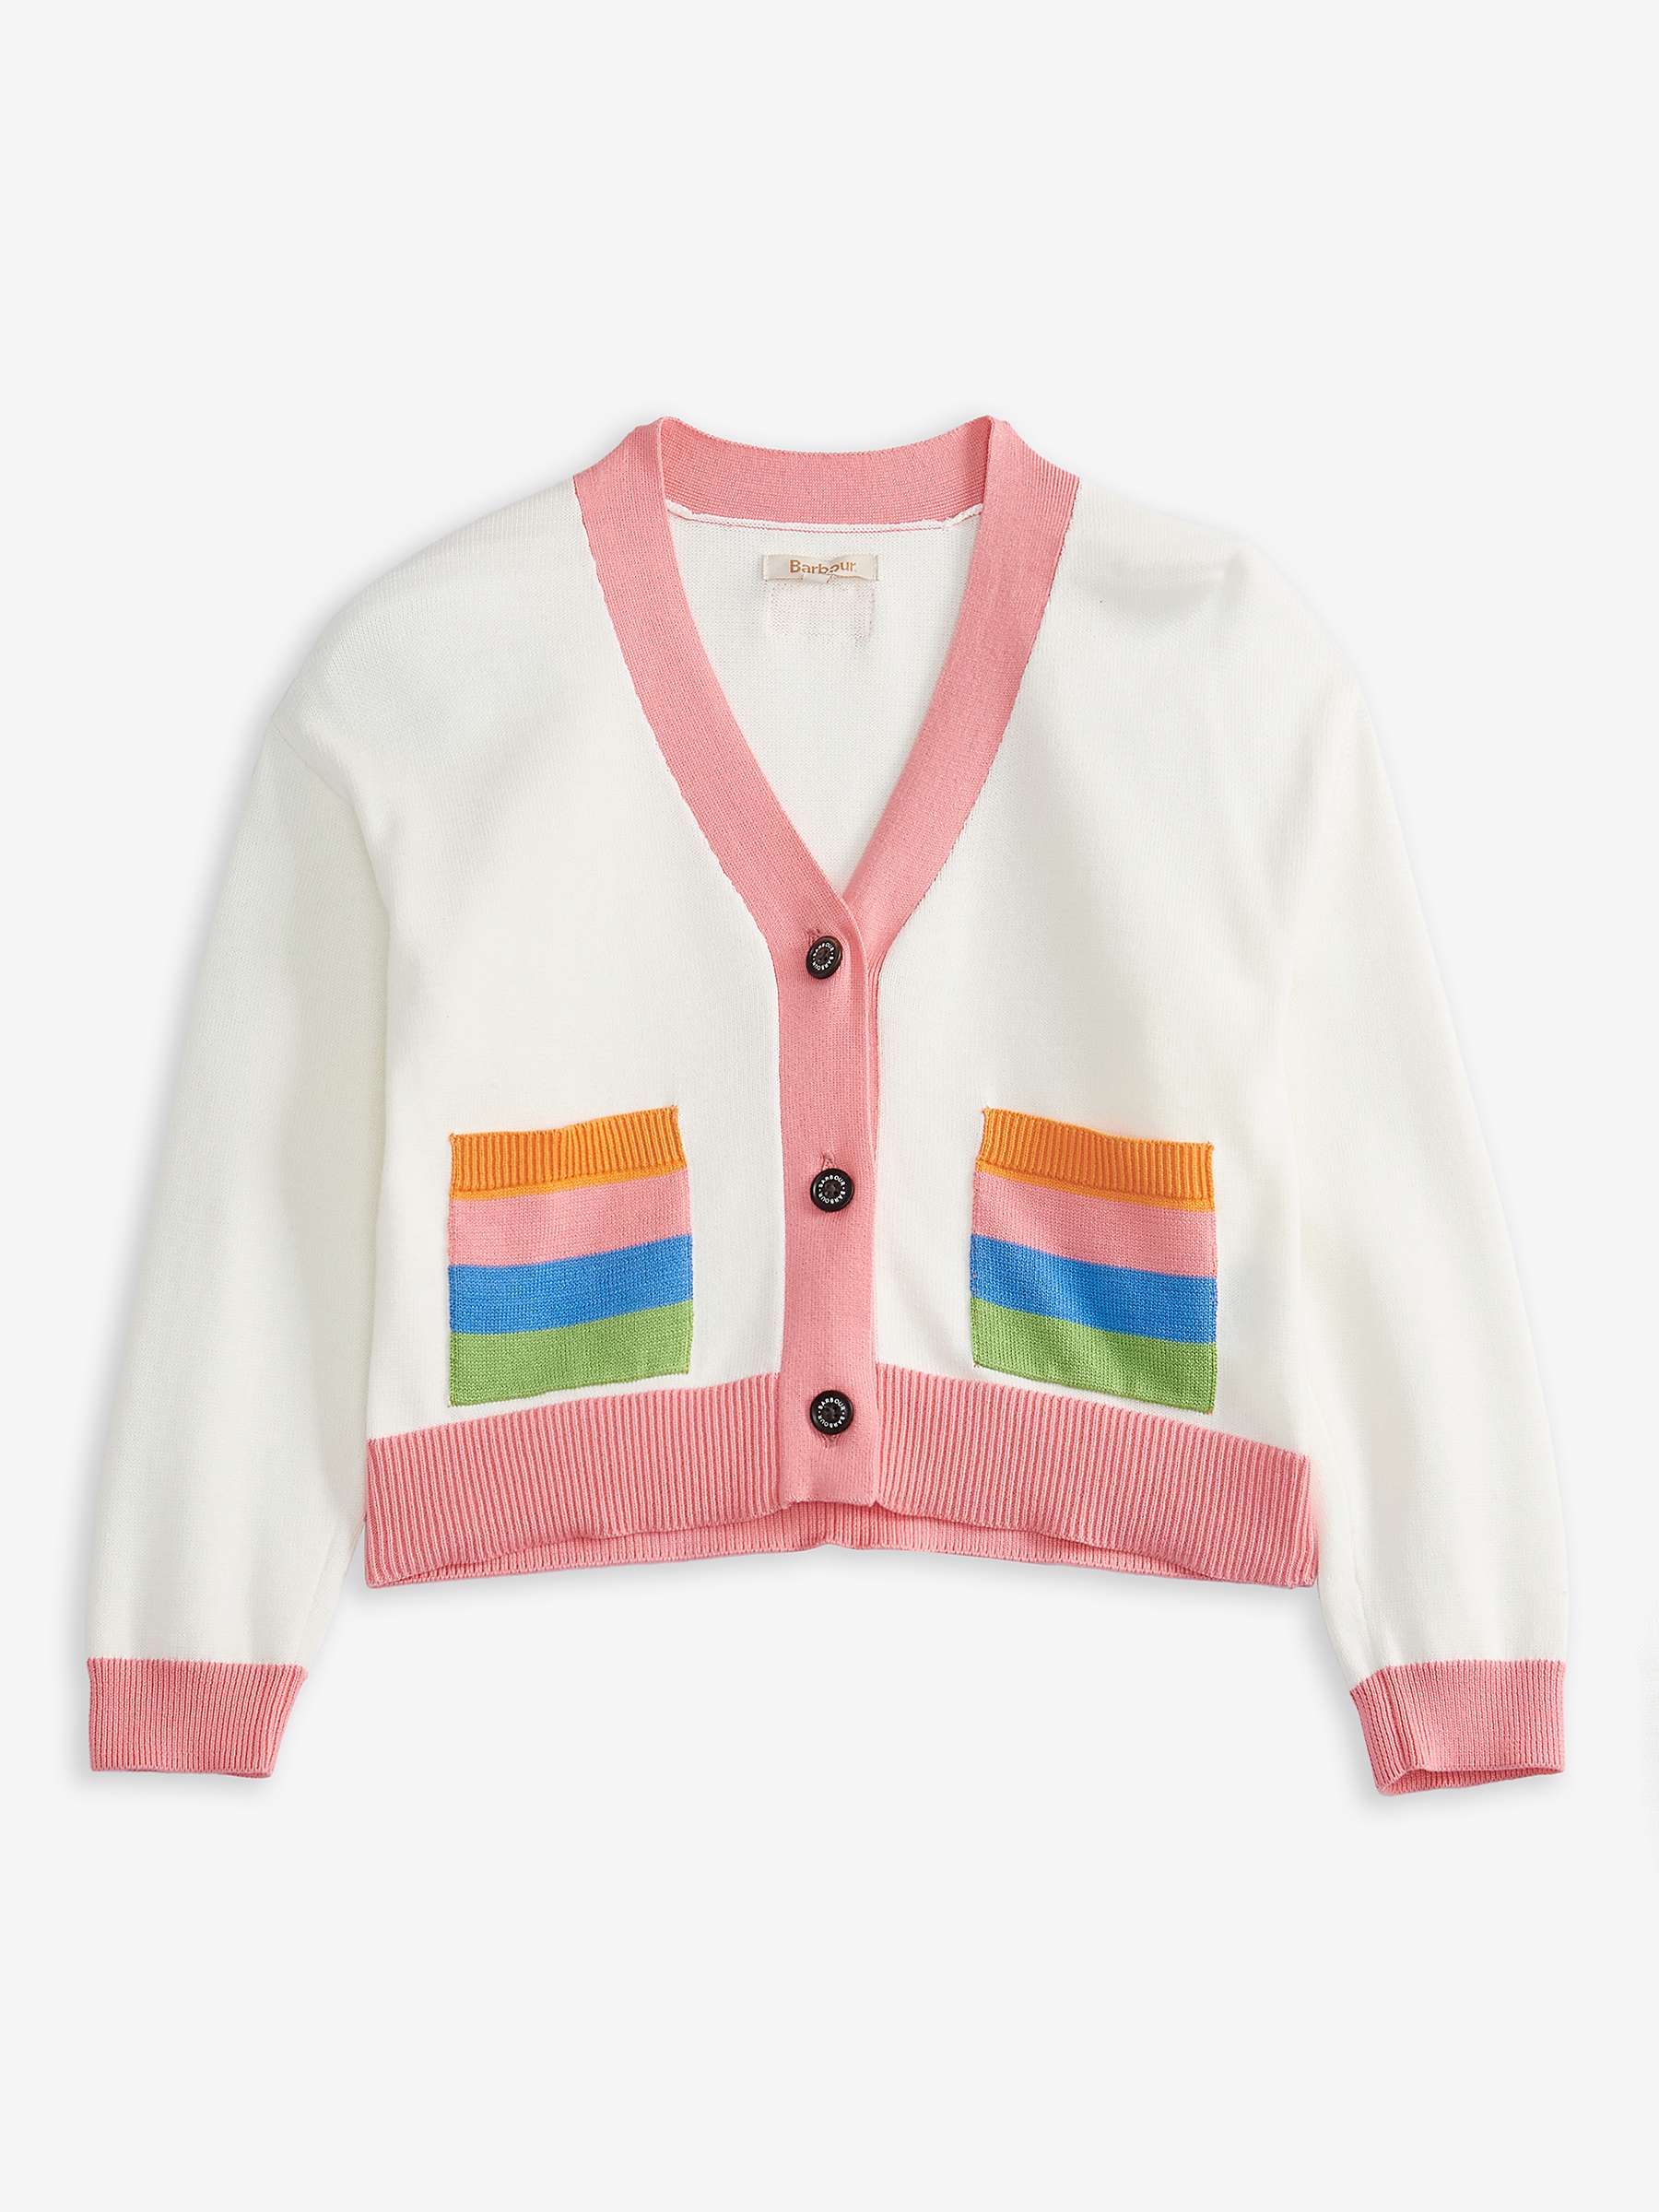 Buy Barbour Kids' Knitted Cardigan, Cream/Pink Online at johnlewis.com